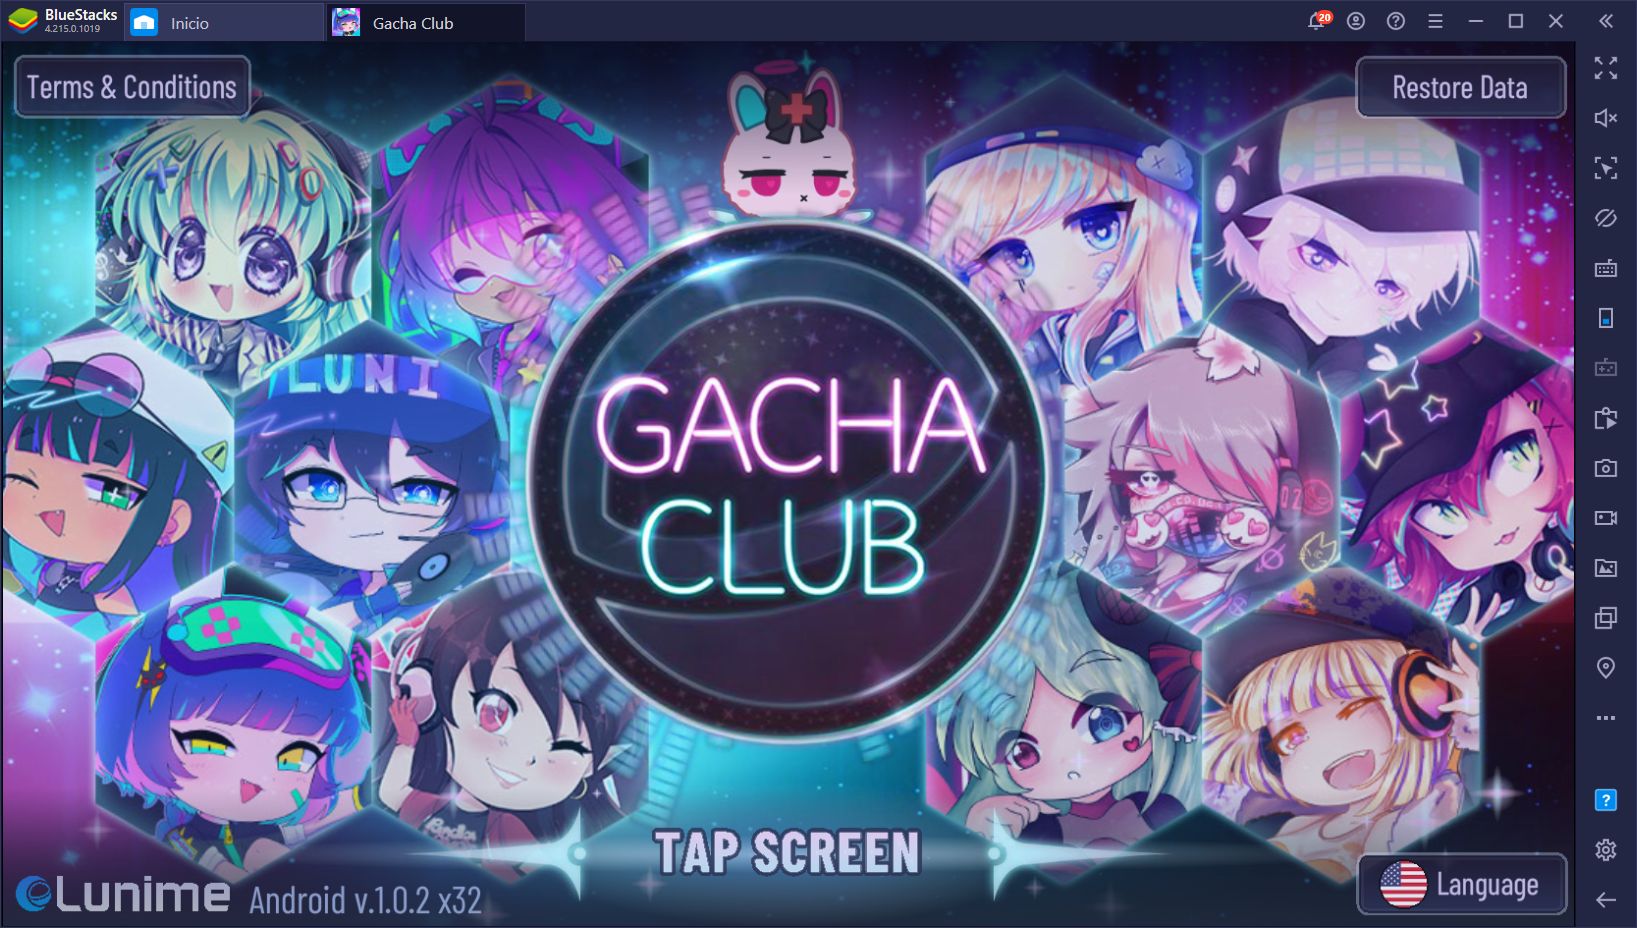 Gacha Club All The New Features And Elements Bluestacks